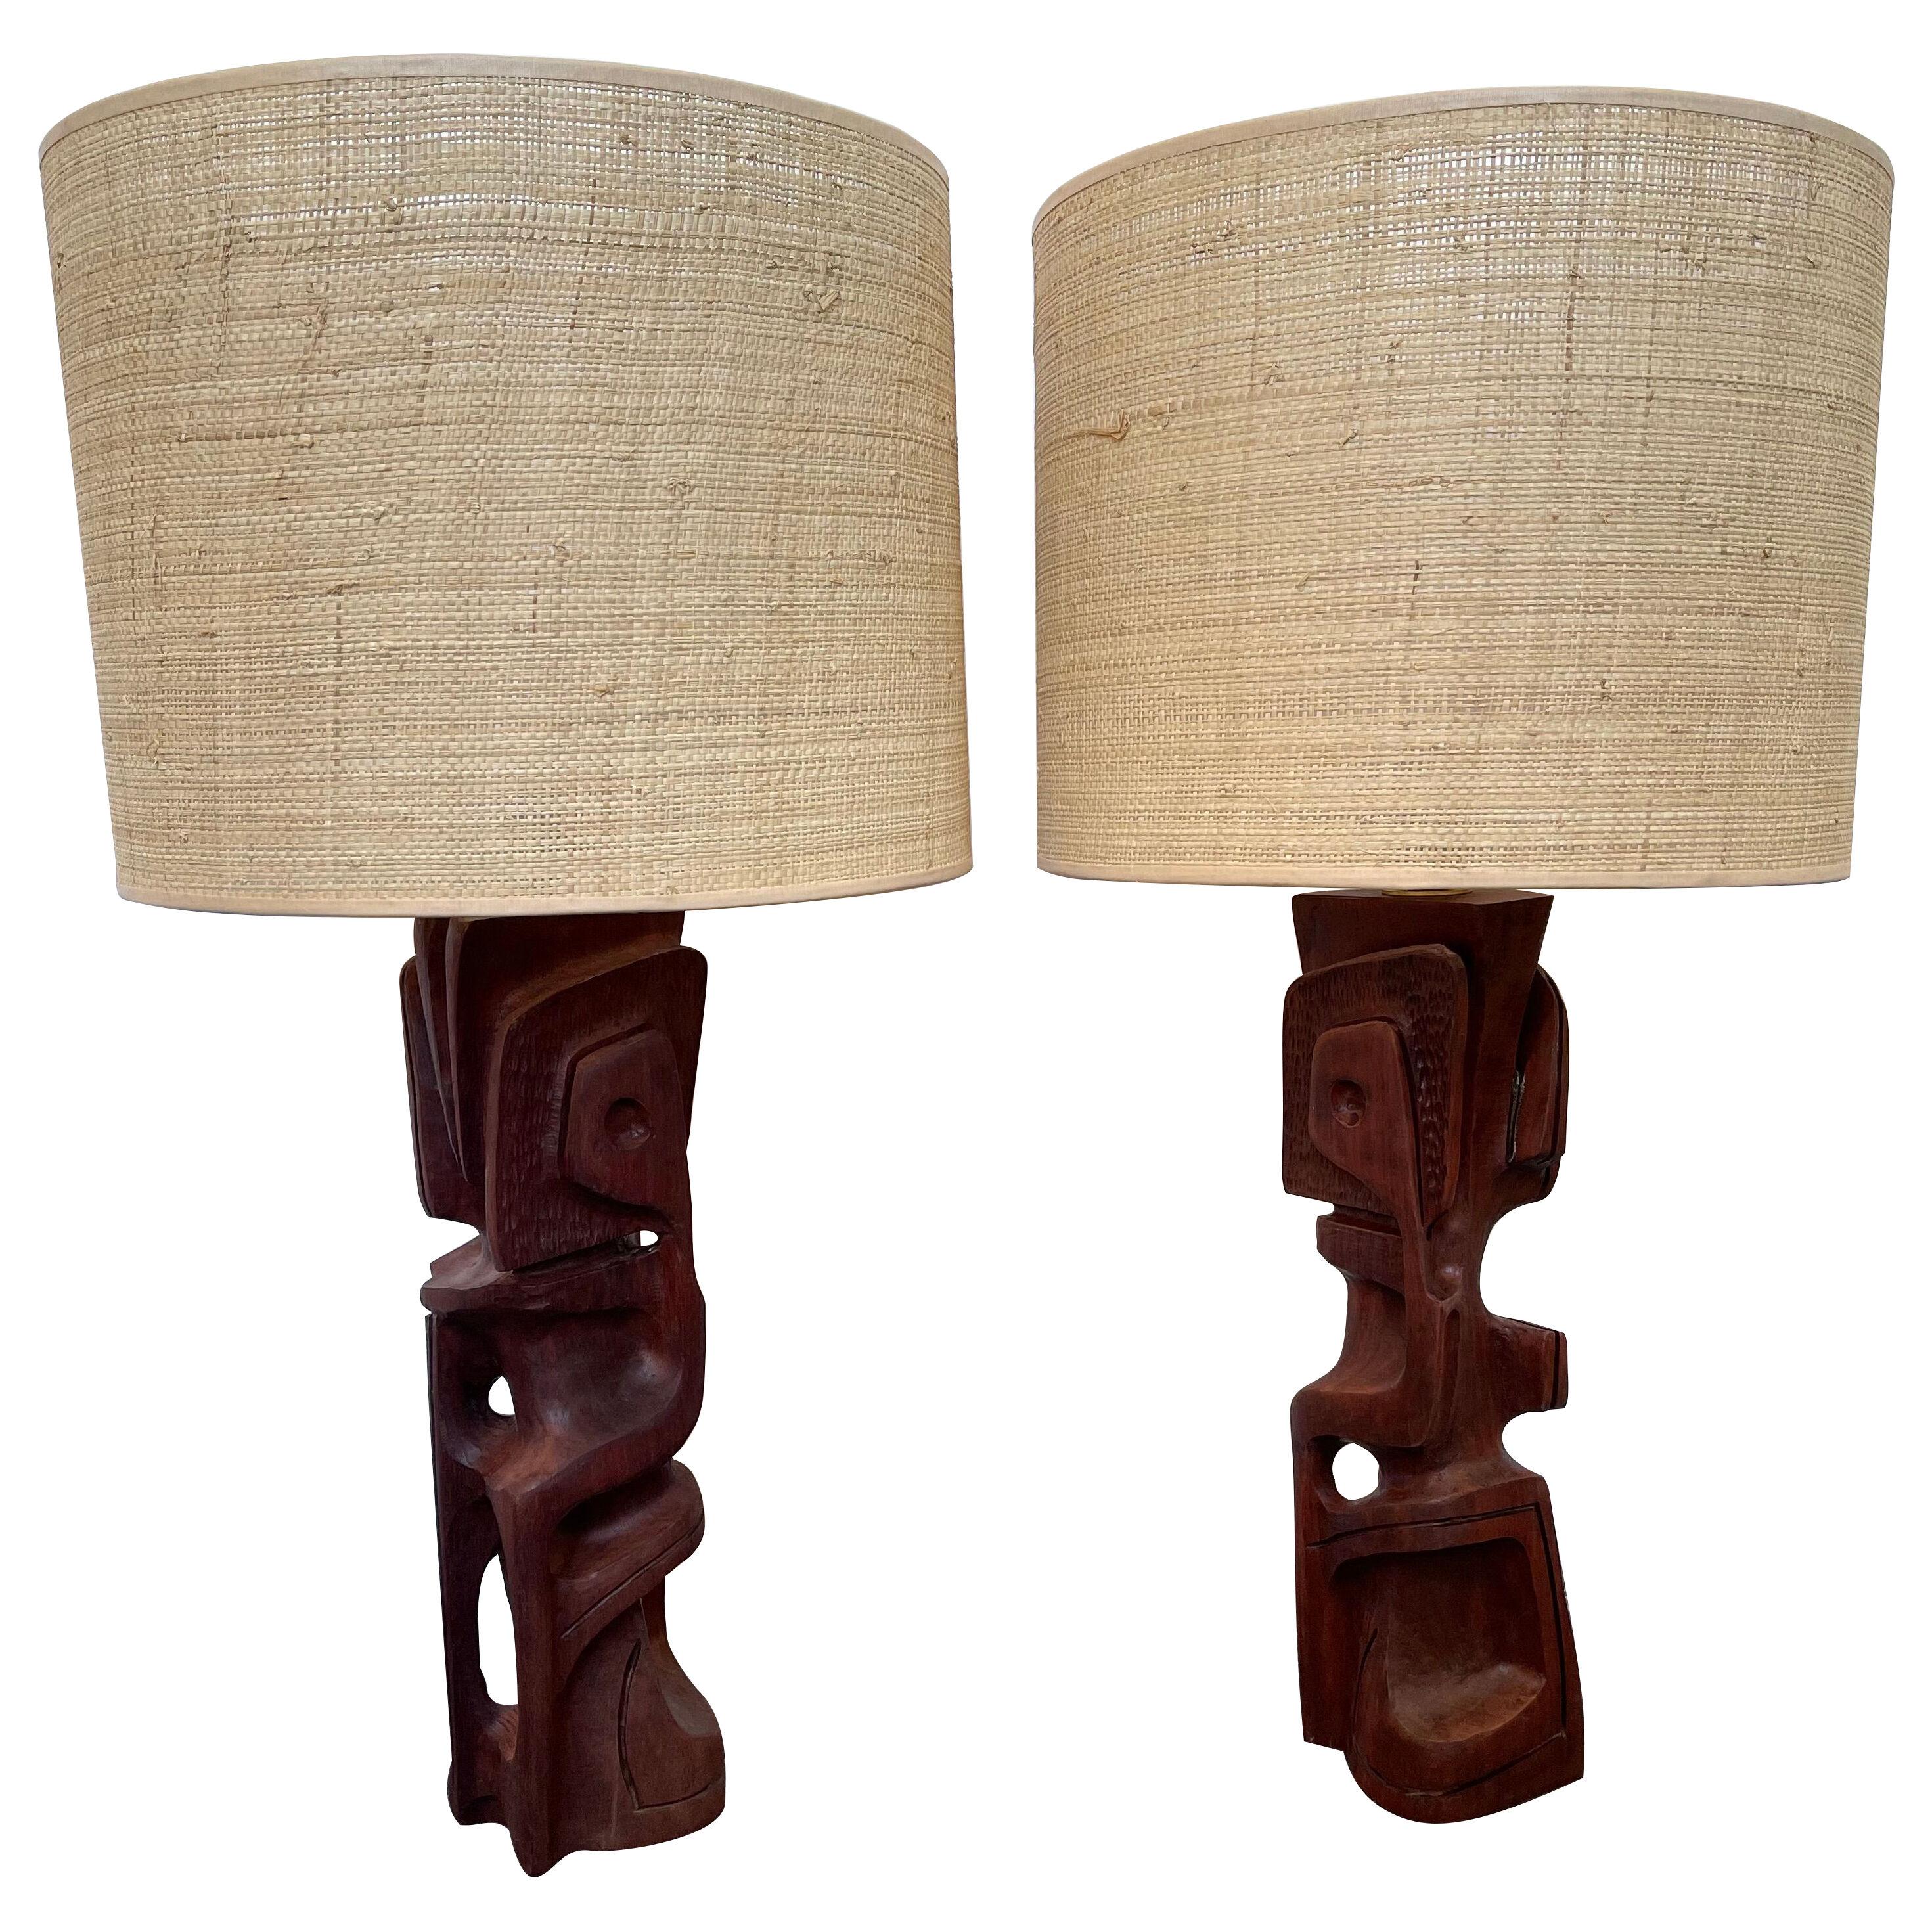 Pair of Wood Sculpture Lamps by Gianni Pinna. Italy, 1970s